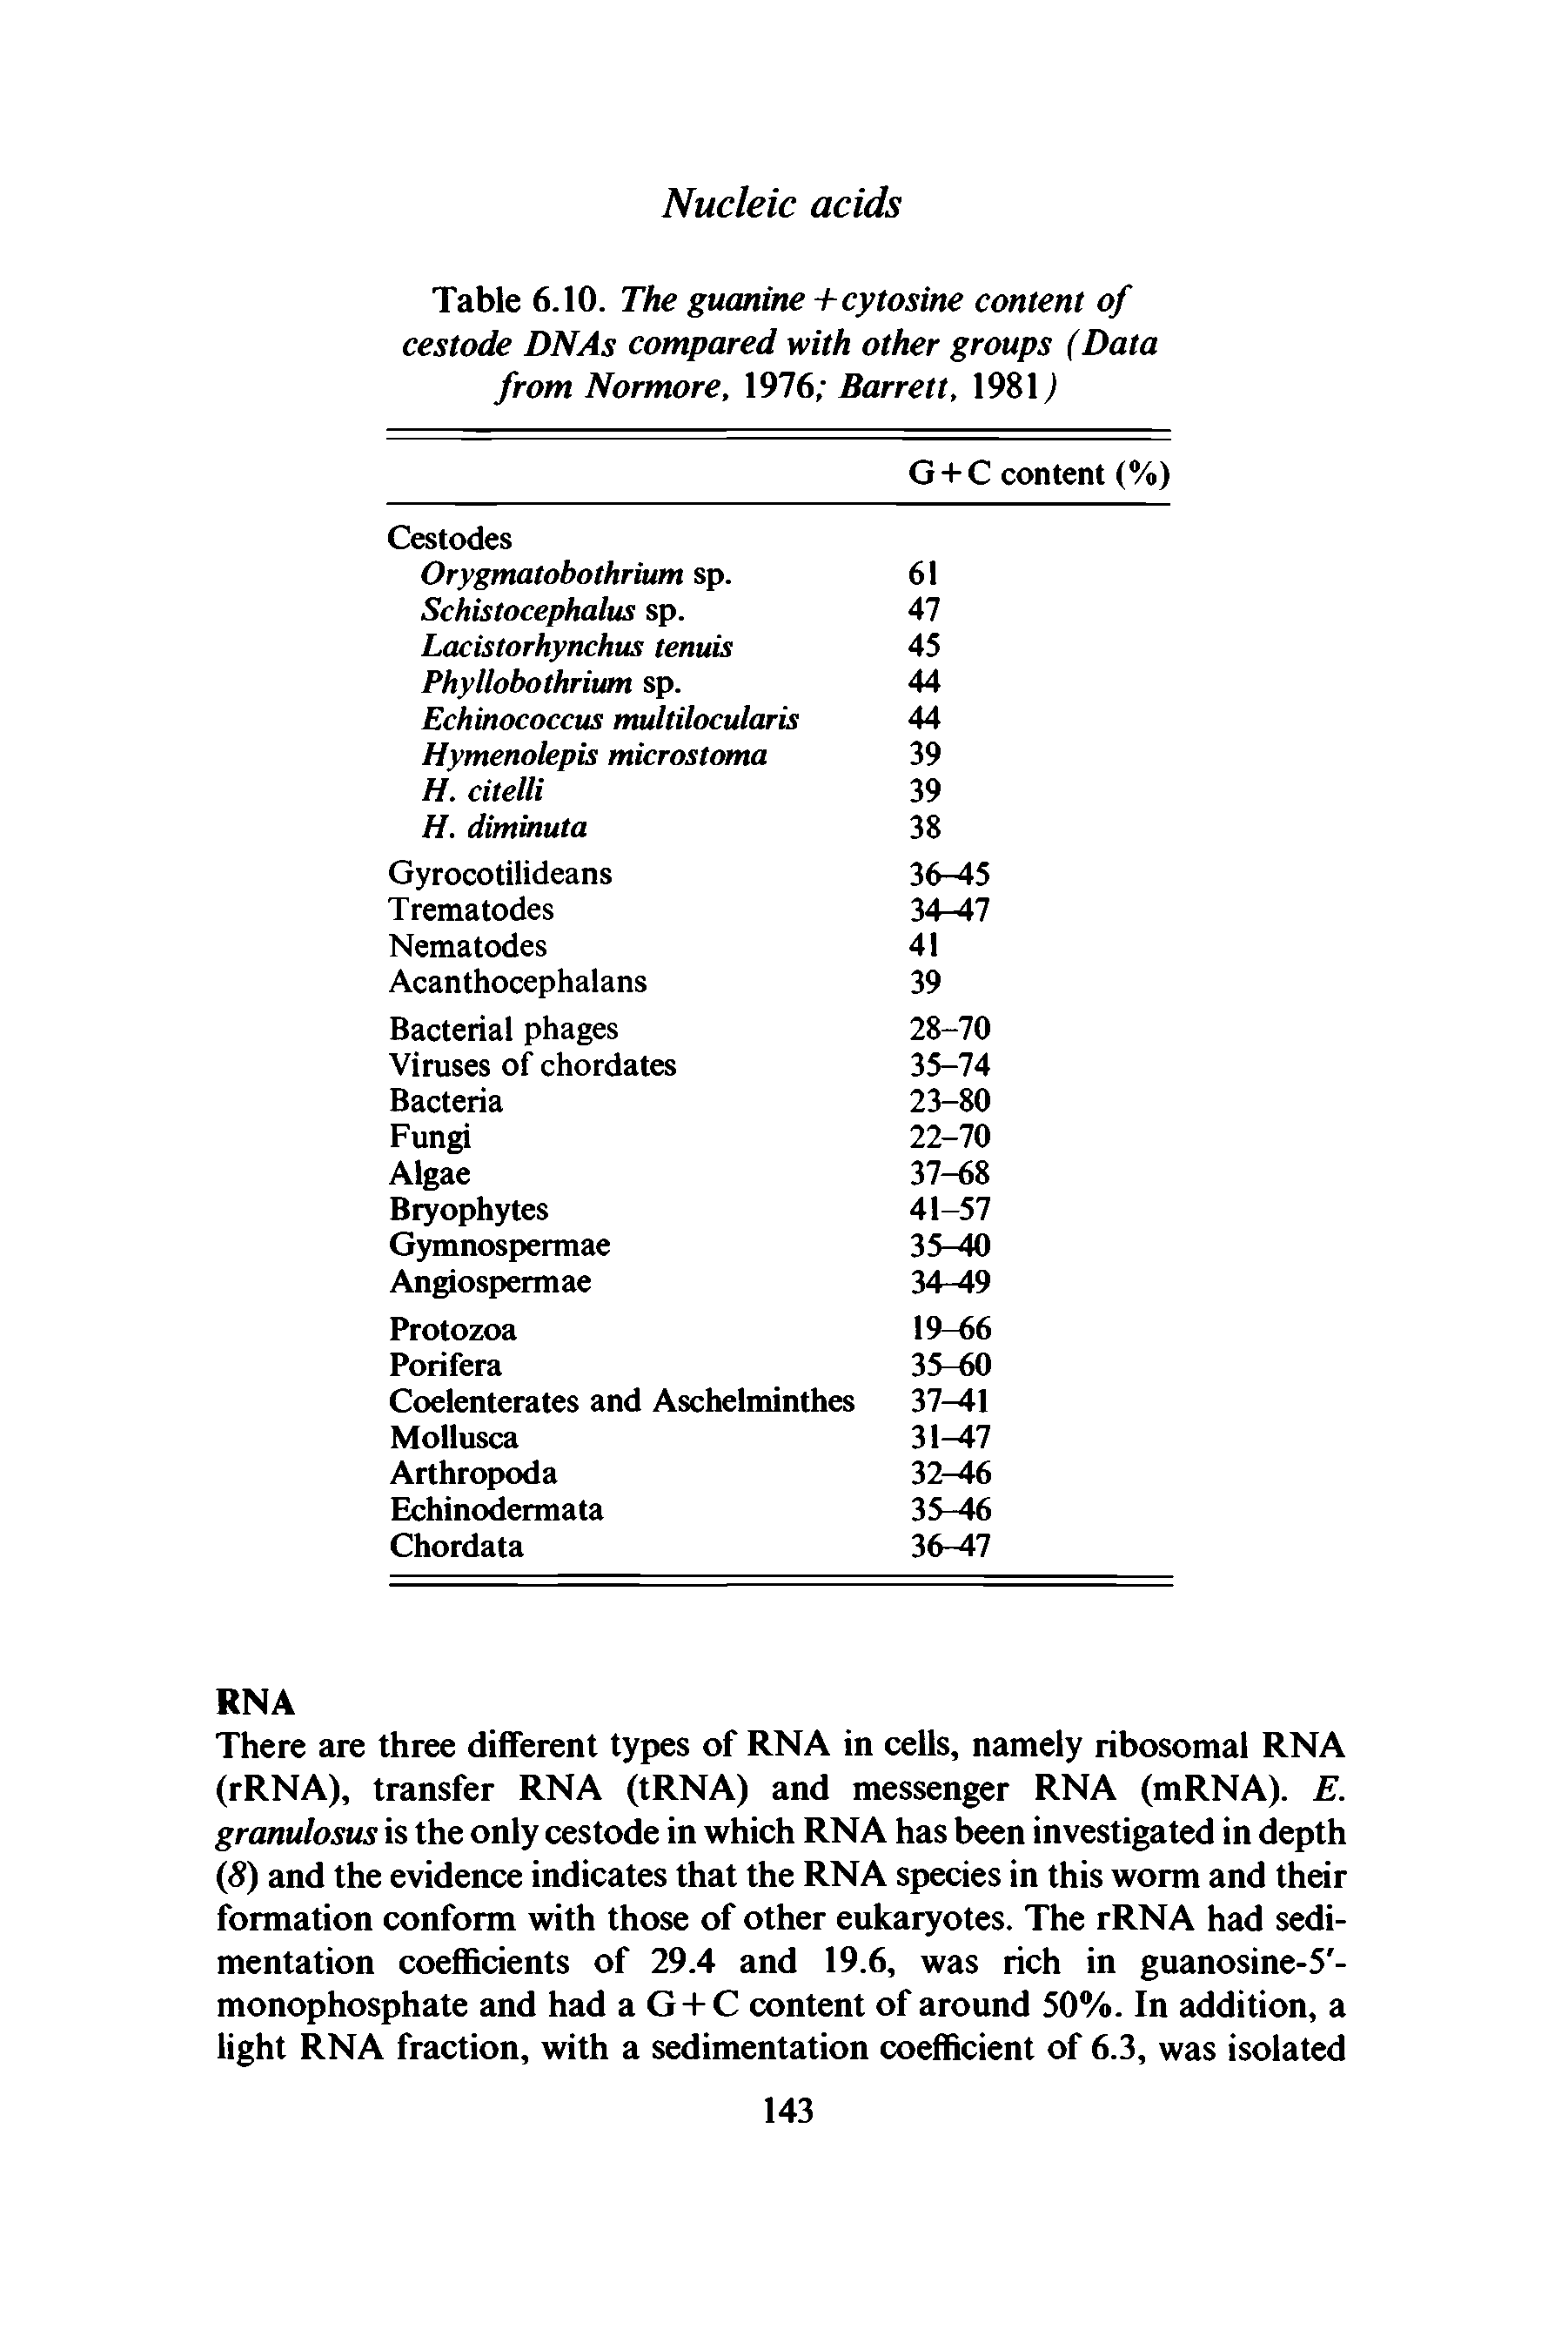 Table 6.10. The guanine +cytosine content of cestode DNAs compared with other groups (Data from Normore, 1976 Barrett, 1981)...